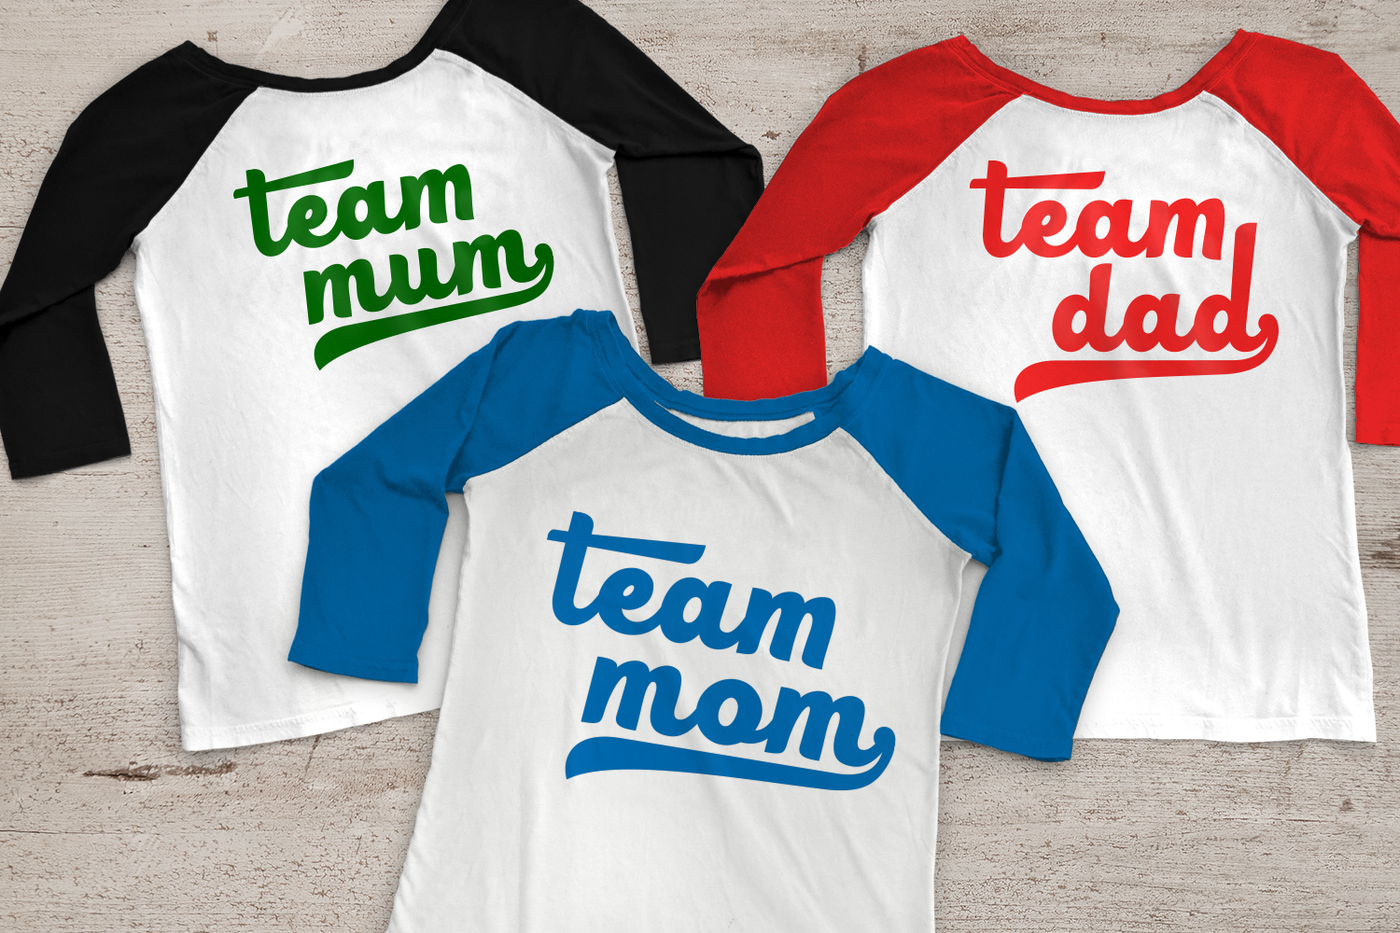 Three raglan tees sit on a wood background. Each has baseball style letters and they say "Team mum," "Team mom," and "Team dad."